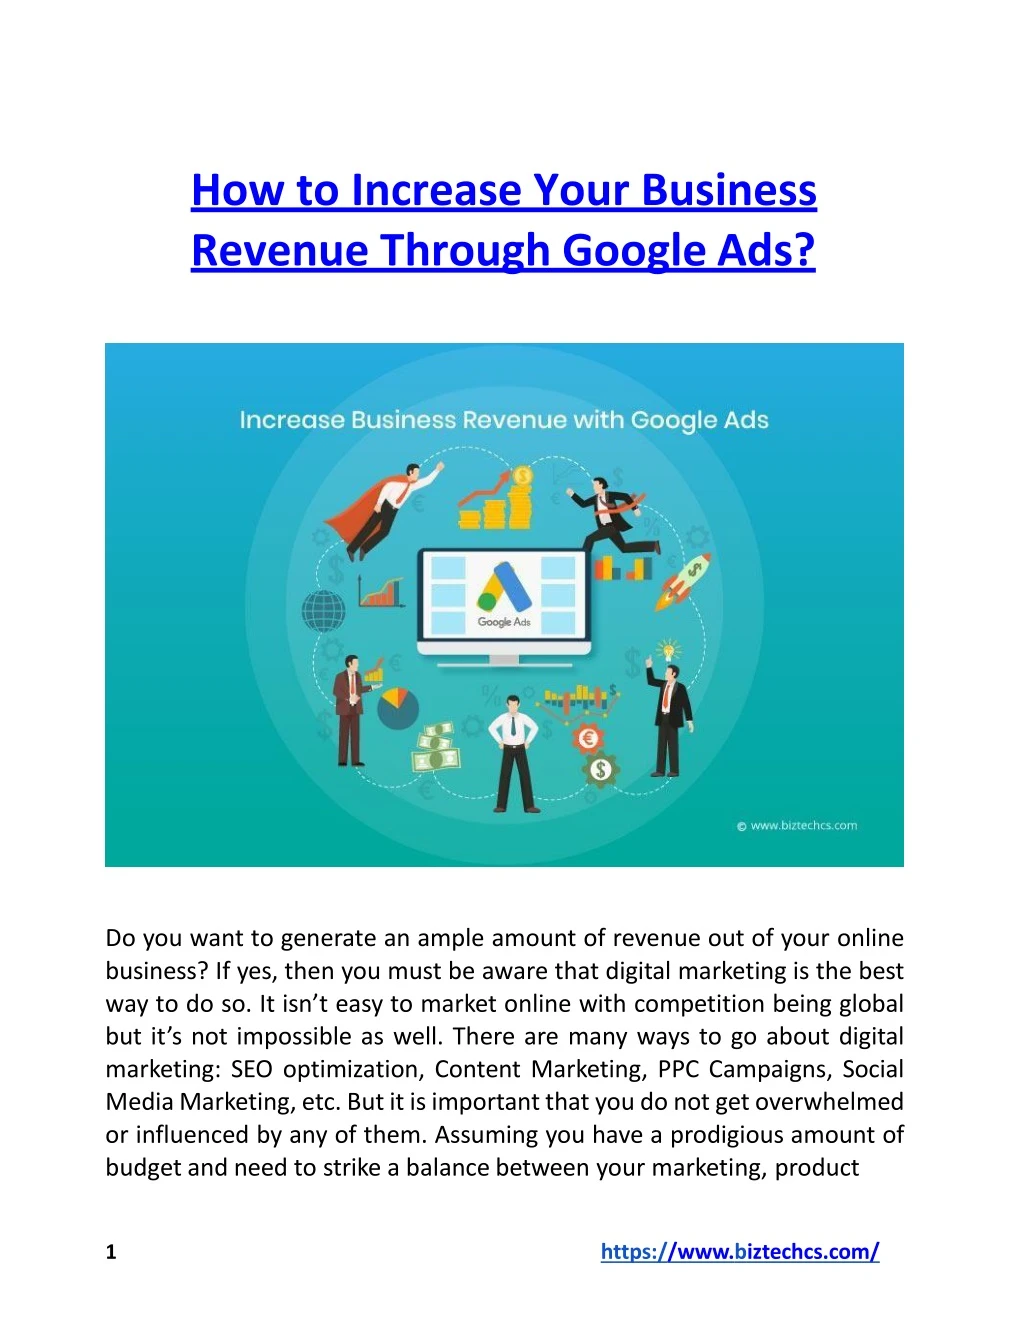 how to increase your business revenue through google ads